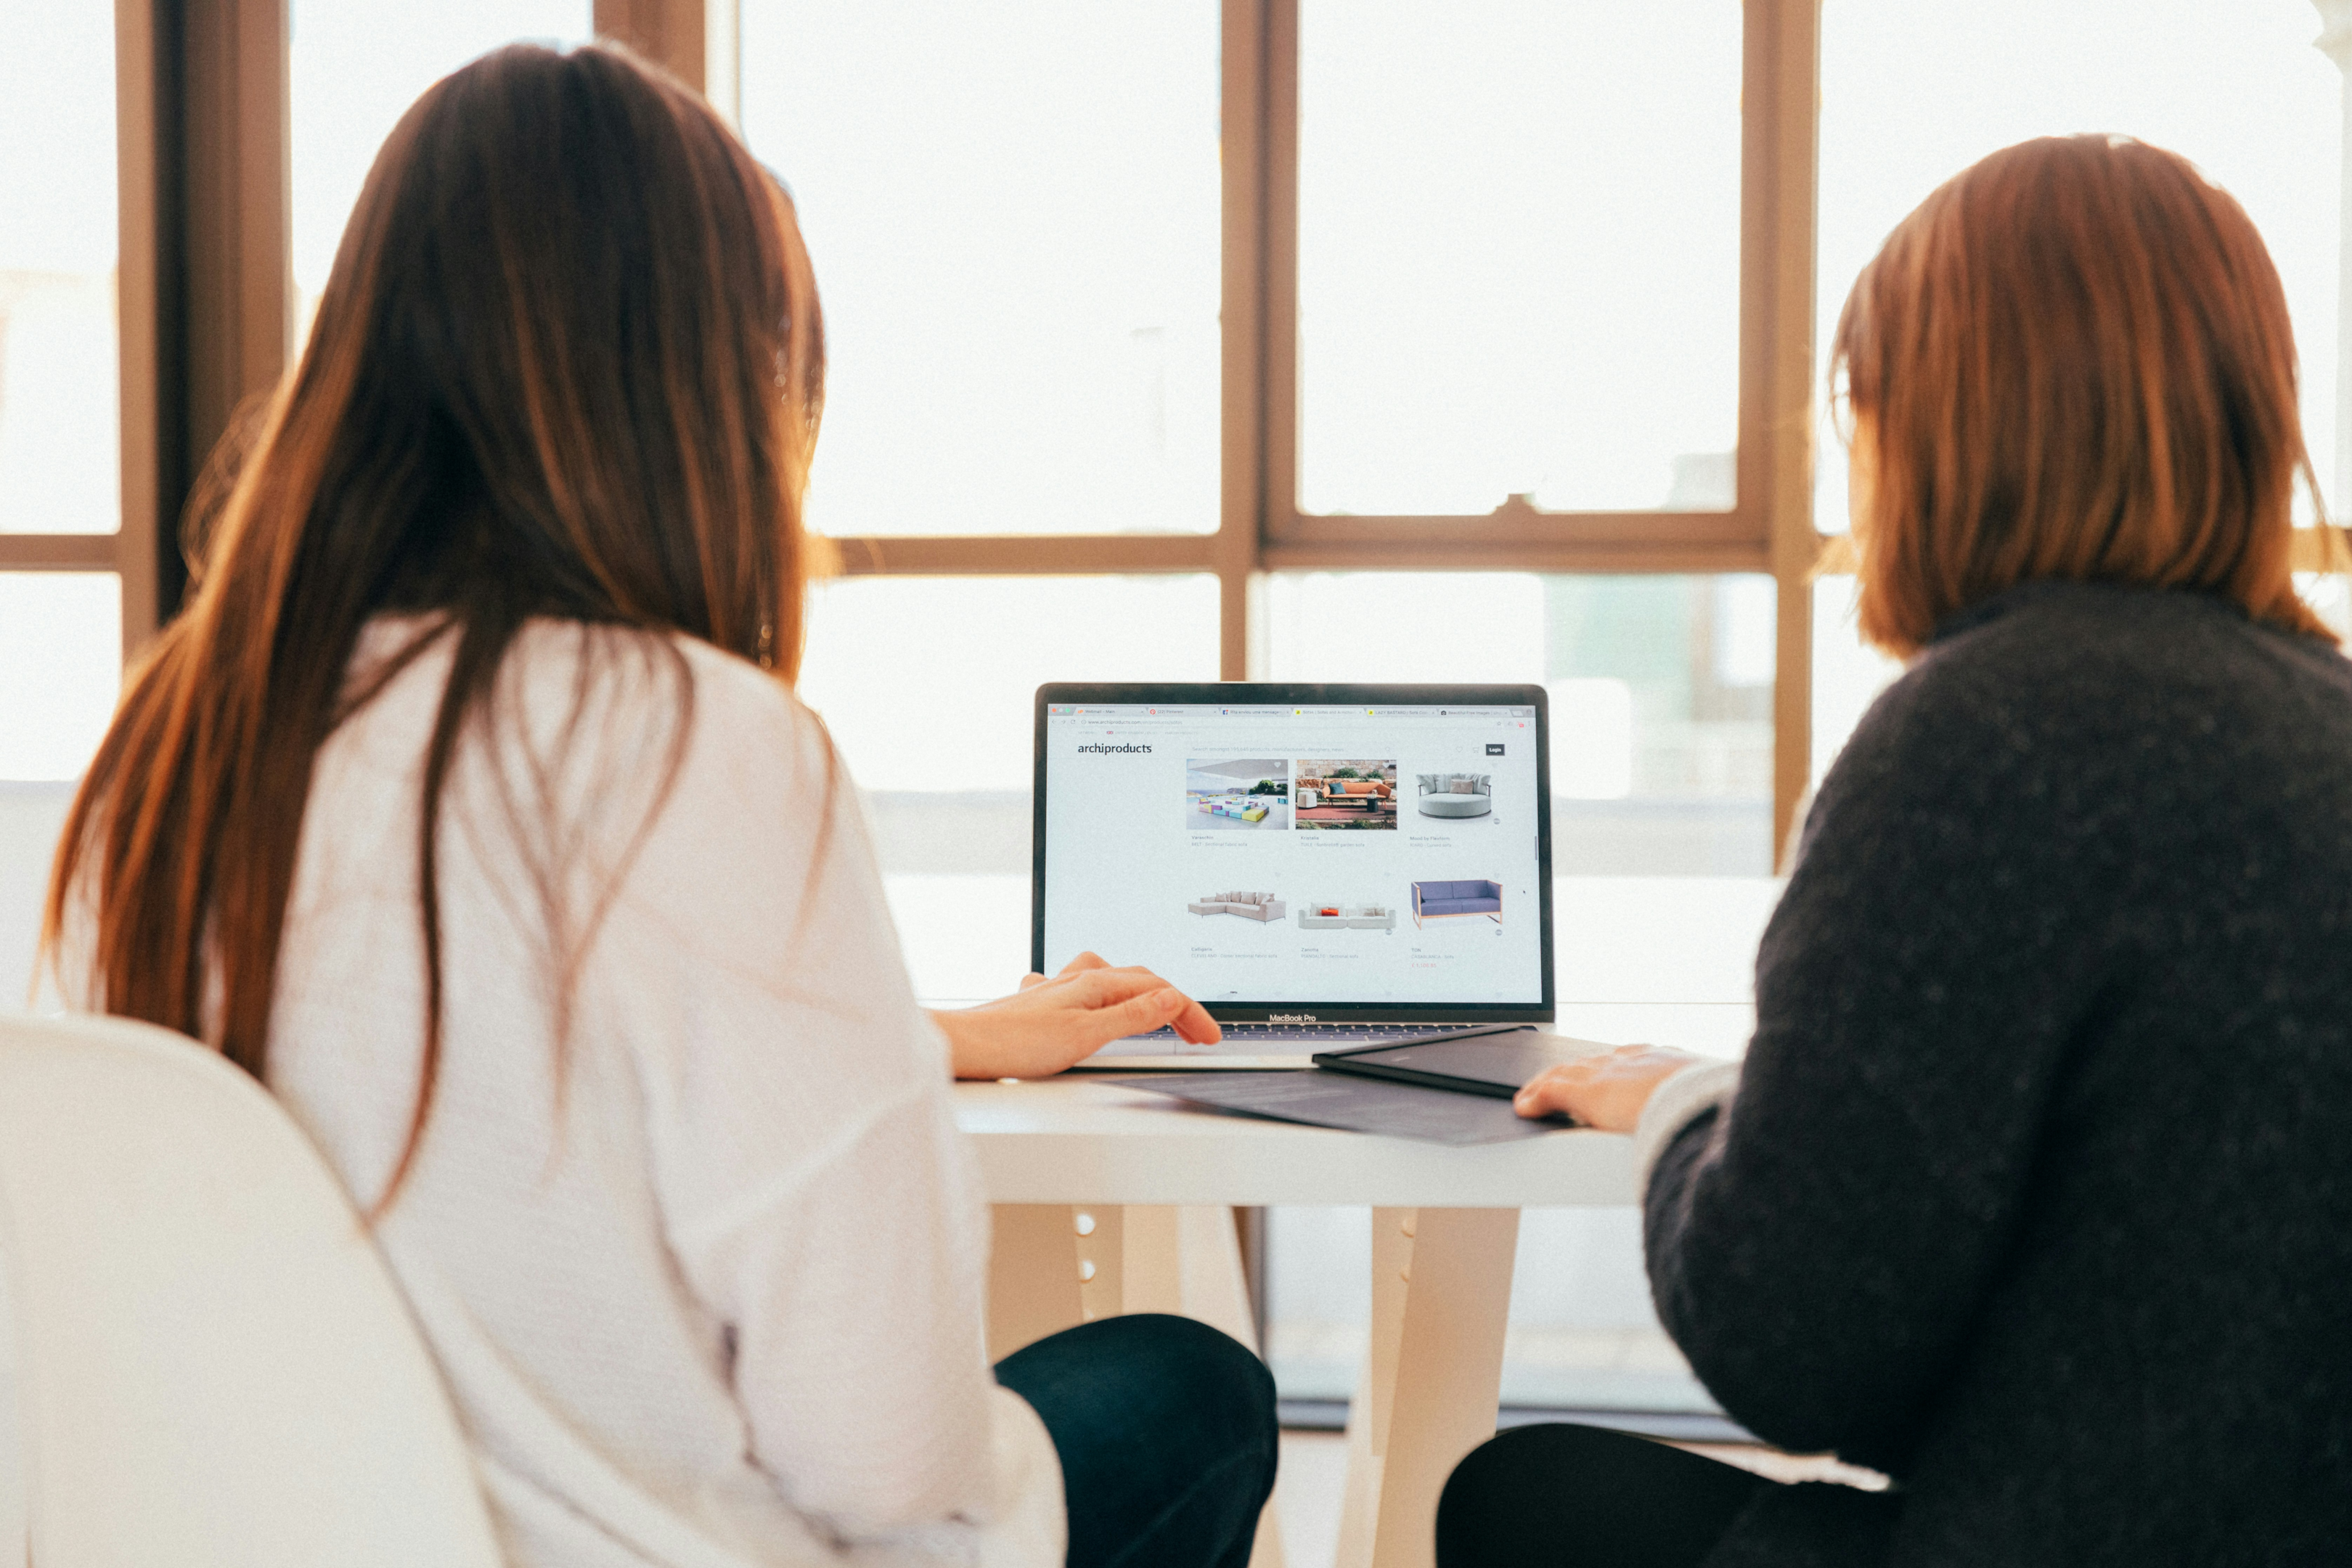 Two feminine-presenting, likely white people sit facing away from the camera. They're both looking at a laptop on a white table as though collaborating on something, like career discovery counseling or coaching. 